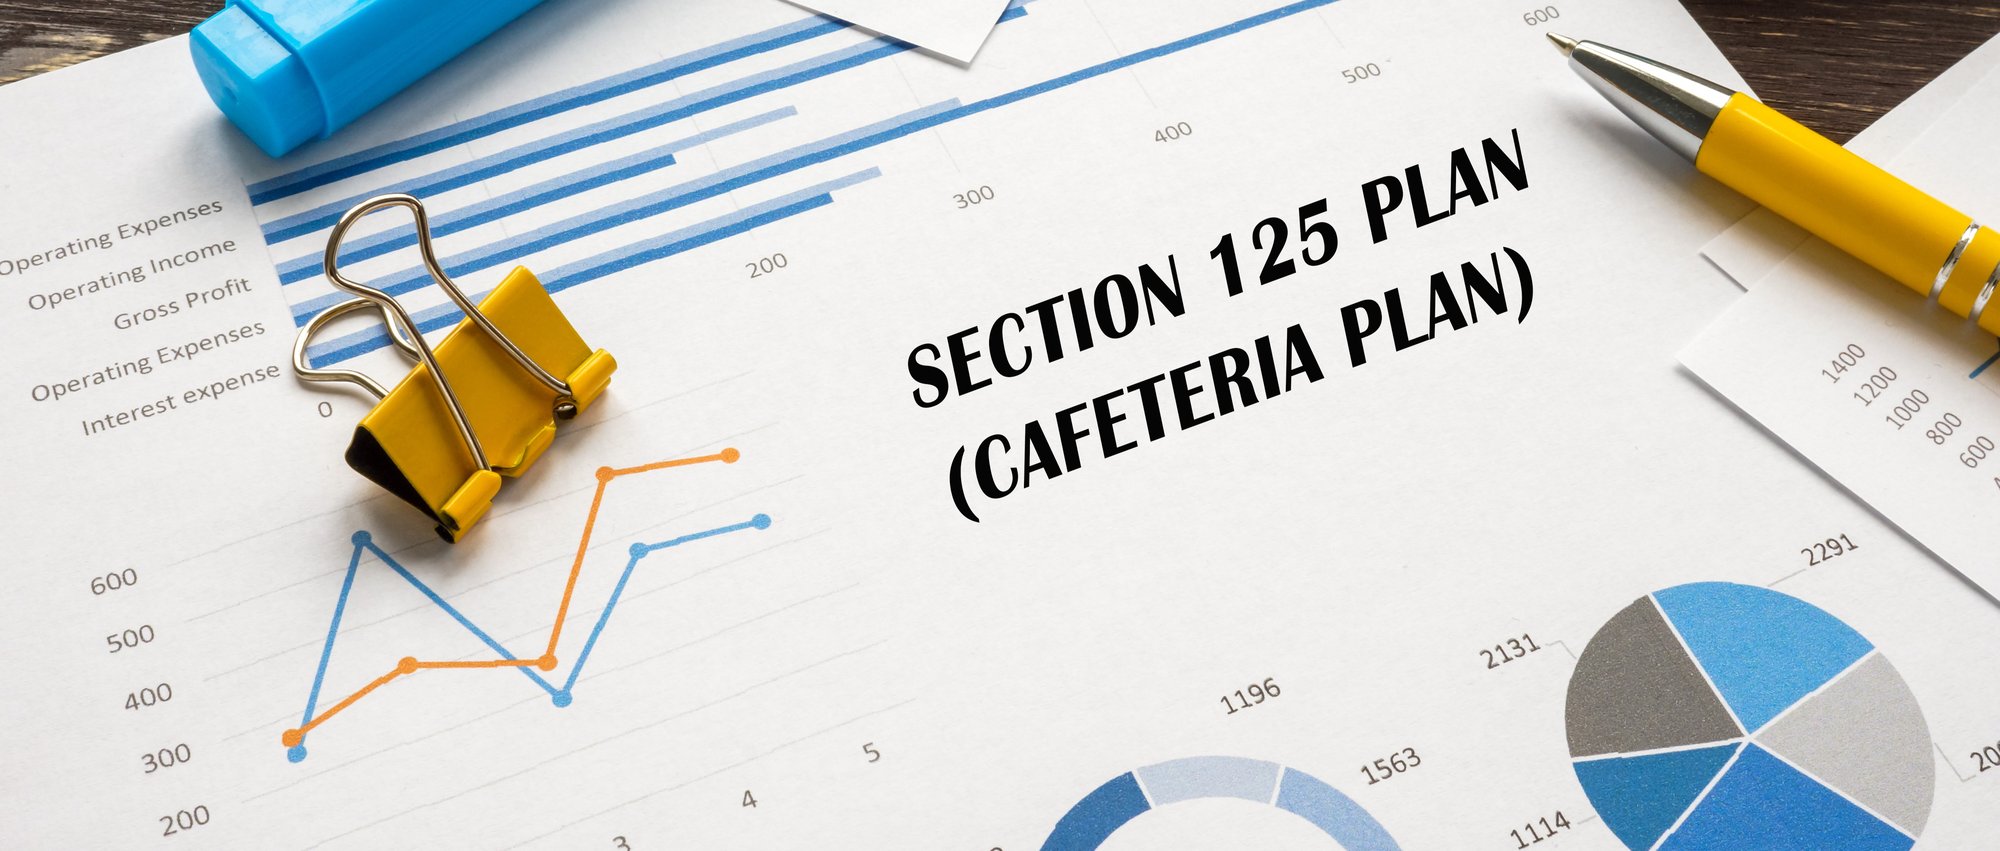 Cafeteria Plan (Section 125 Plan)